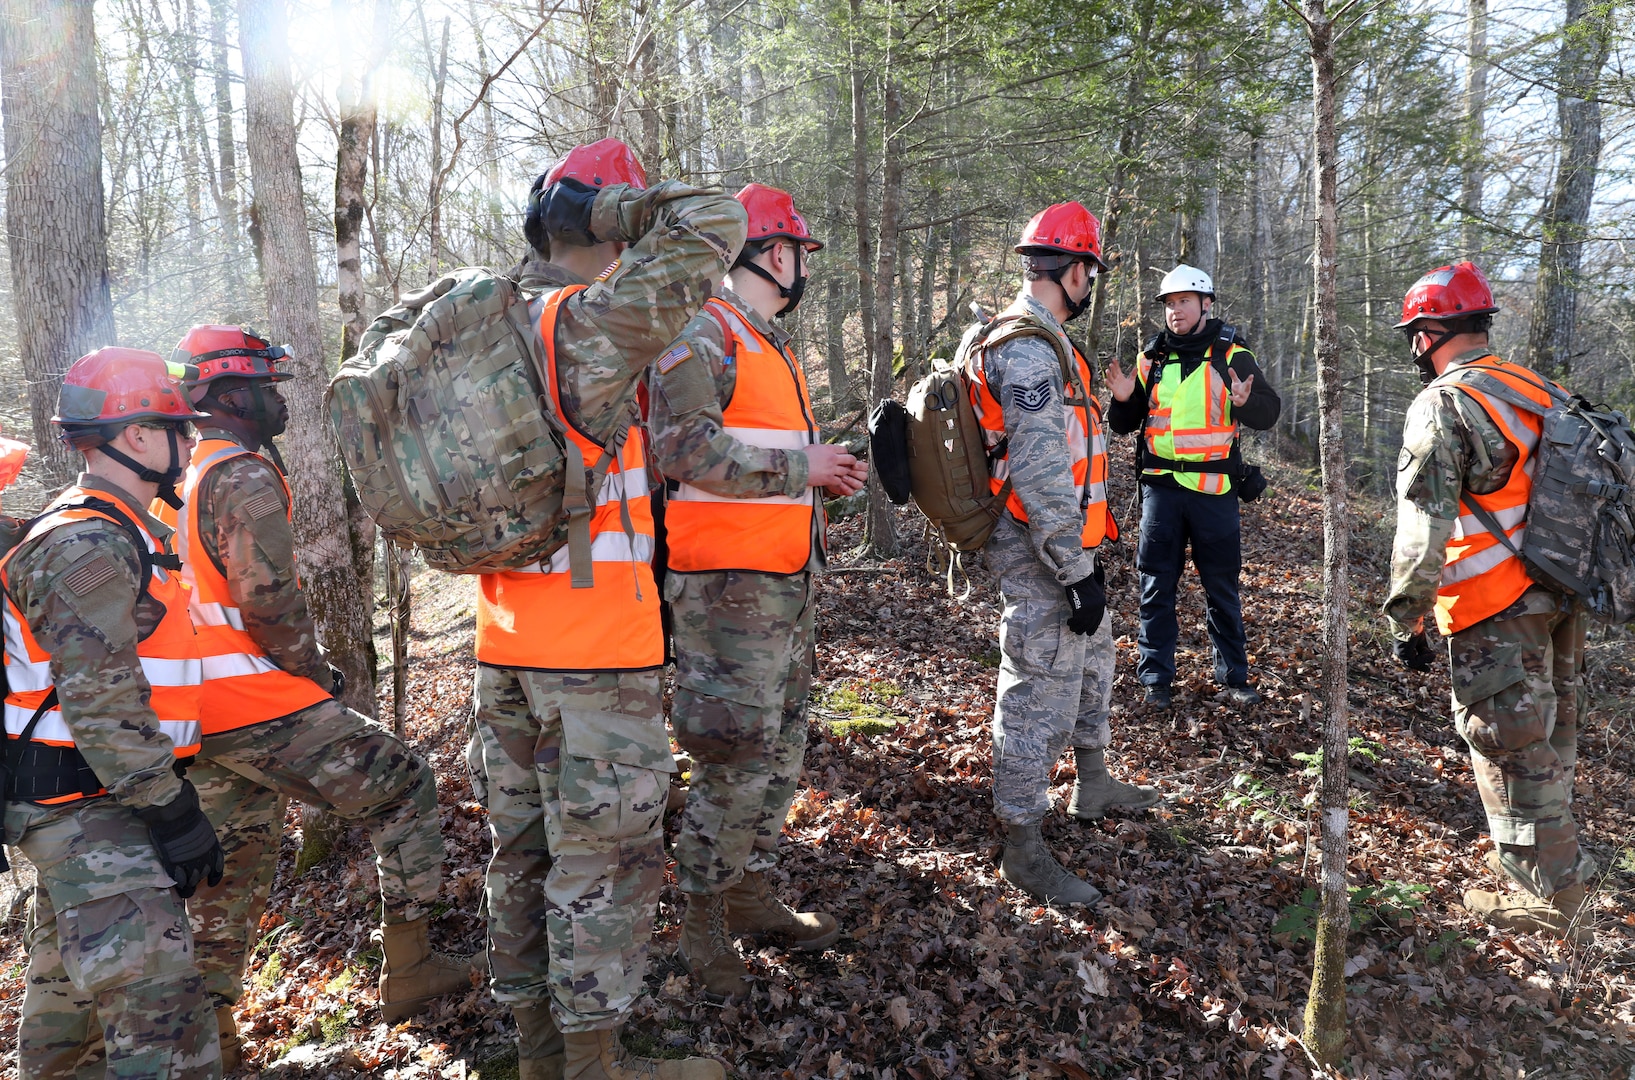 Nathan Kirby, London-Laurel Rescue Squad leader and public information officer, shares tips on looking for people with members of the Kentucky National Guard during search and rescue training in the hills of Daniel Boone National Forest. The training was held March 27-30, 2021.